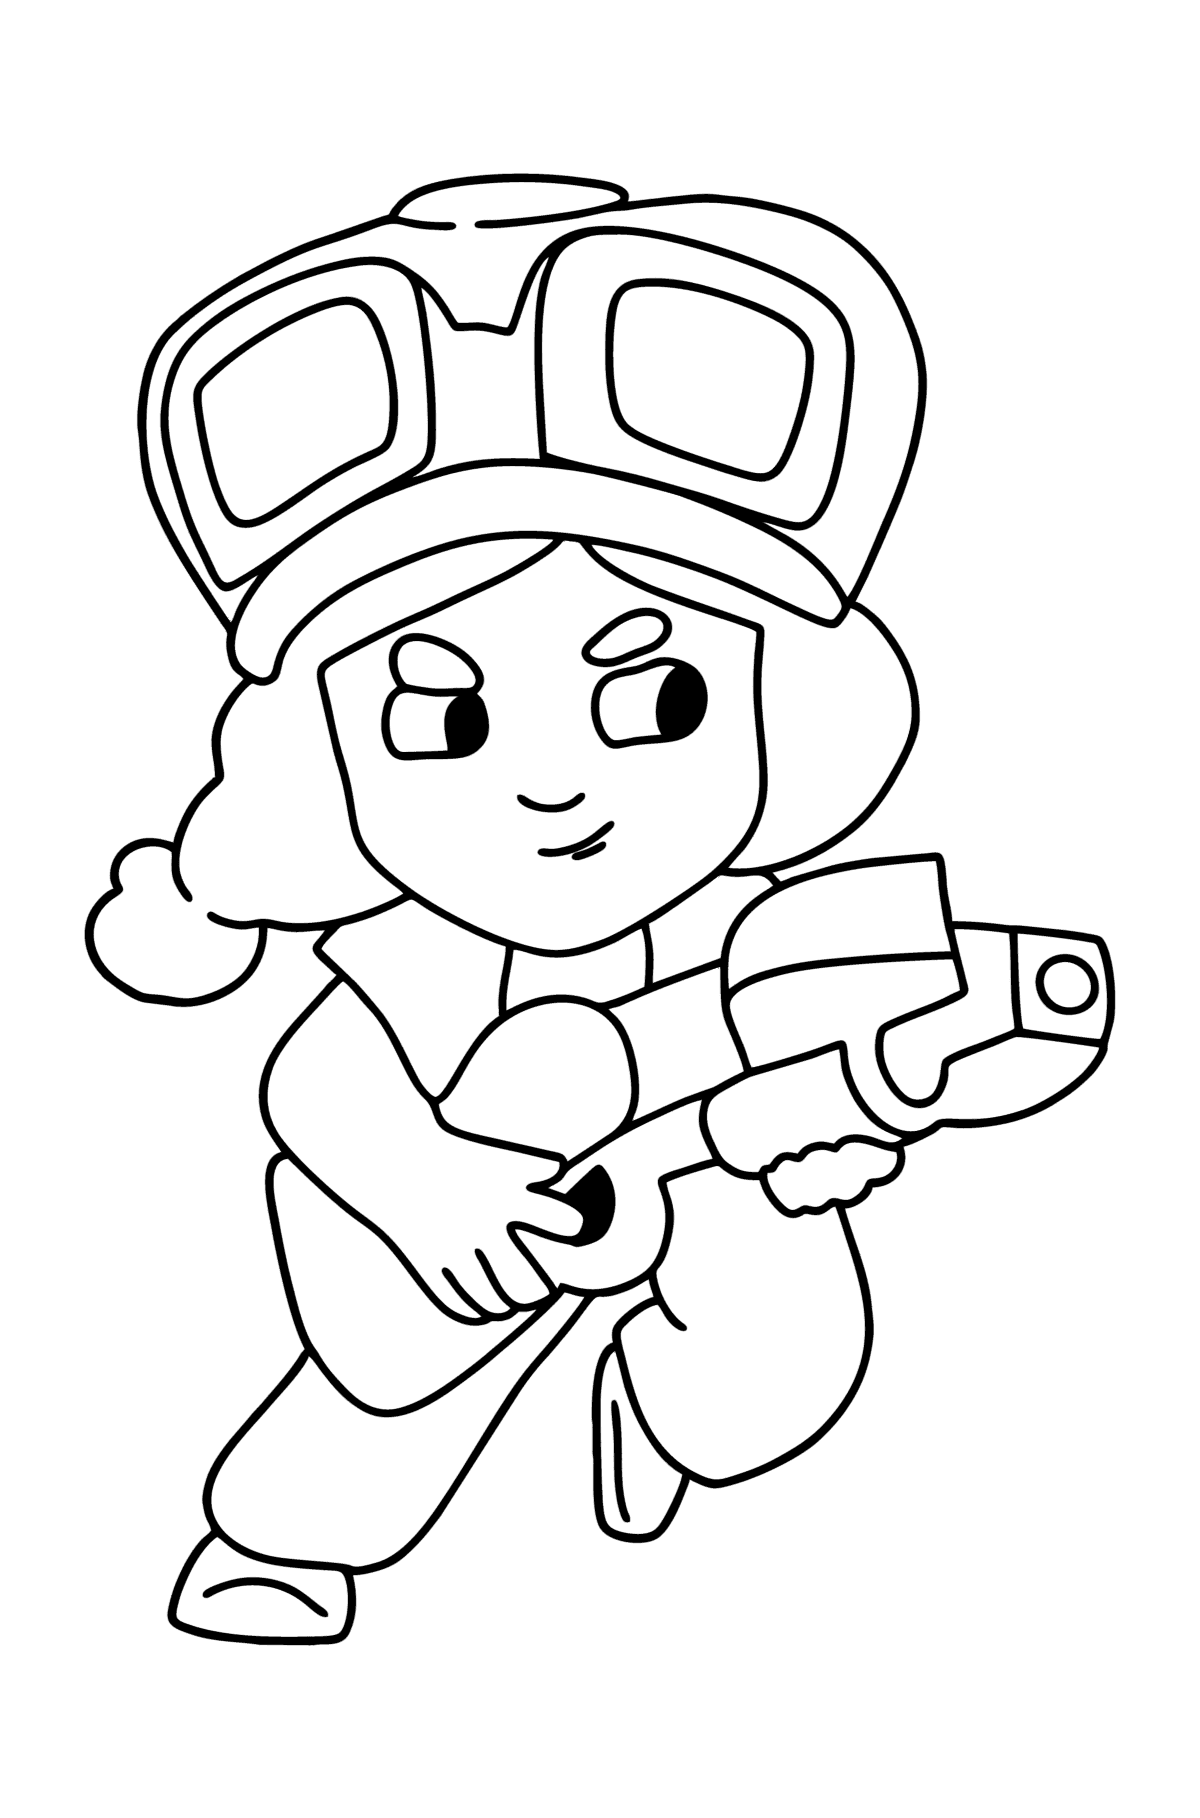 Brawl Stars Jessie coloring page - Coloring Pages for Kids